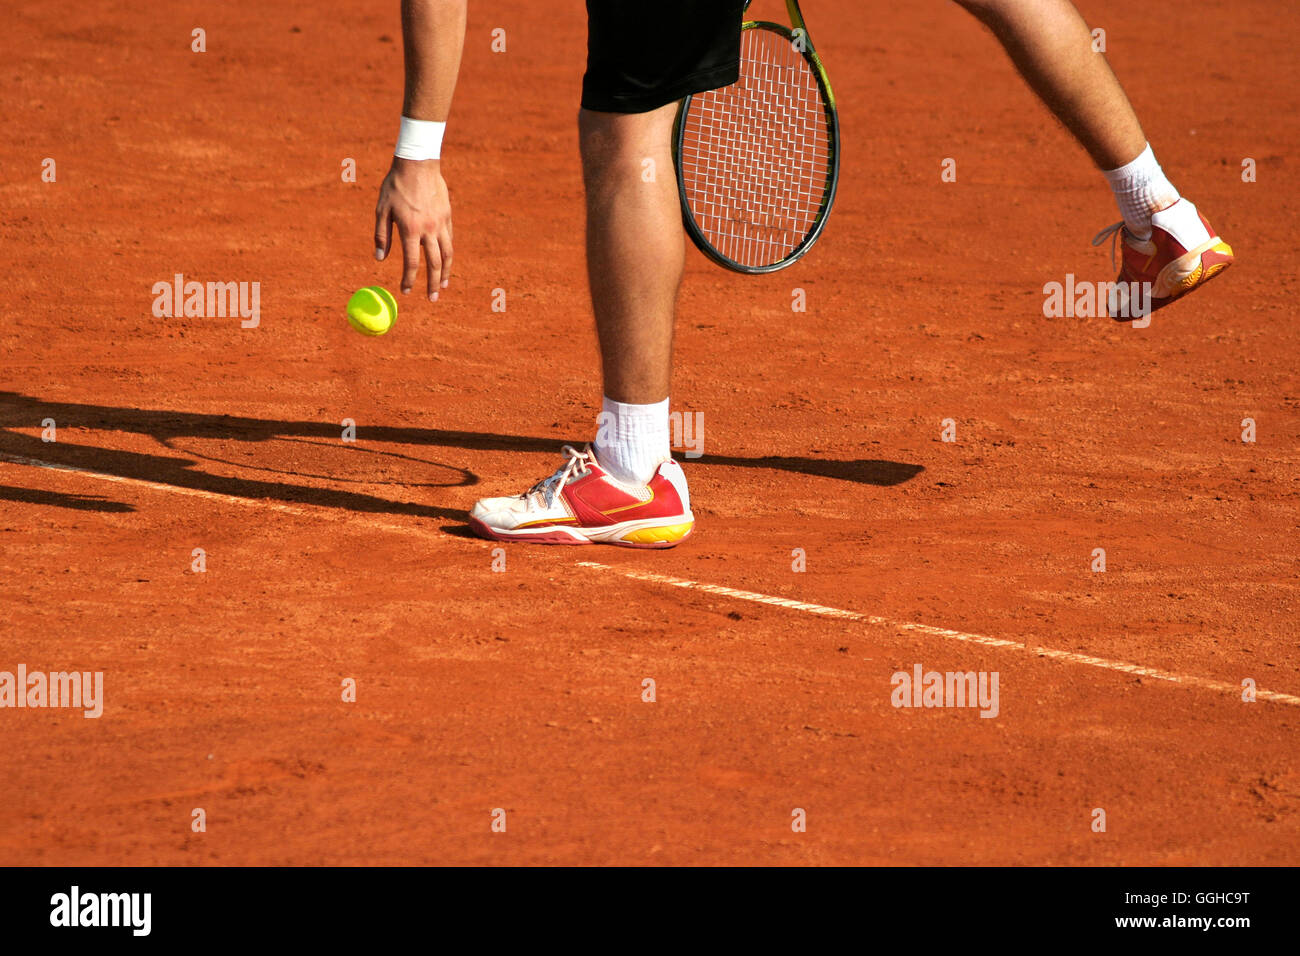 Tennis player preparing for service on clay courts Stock Photo